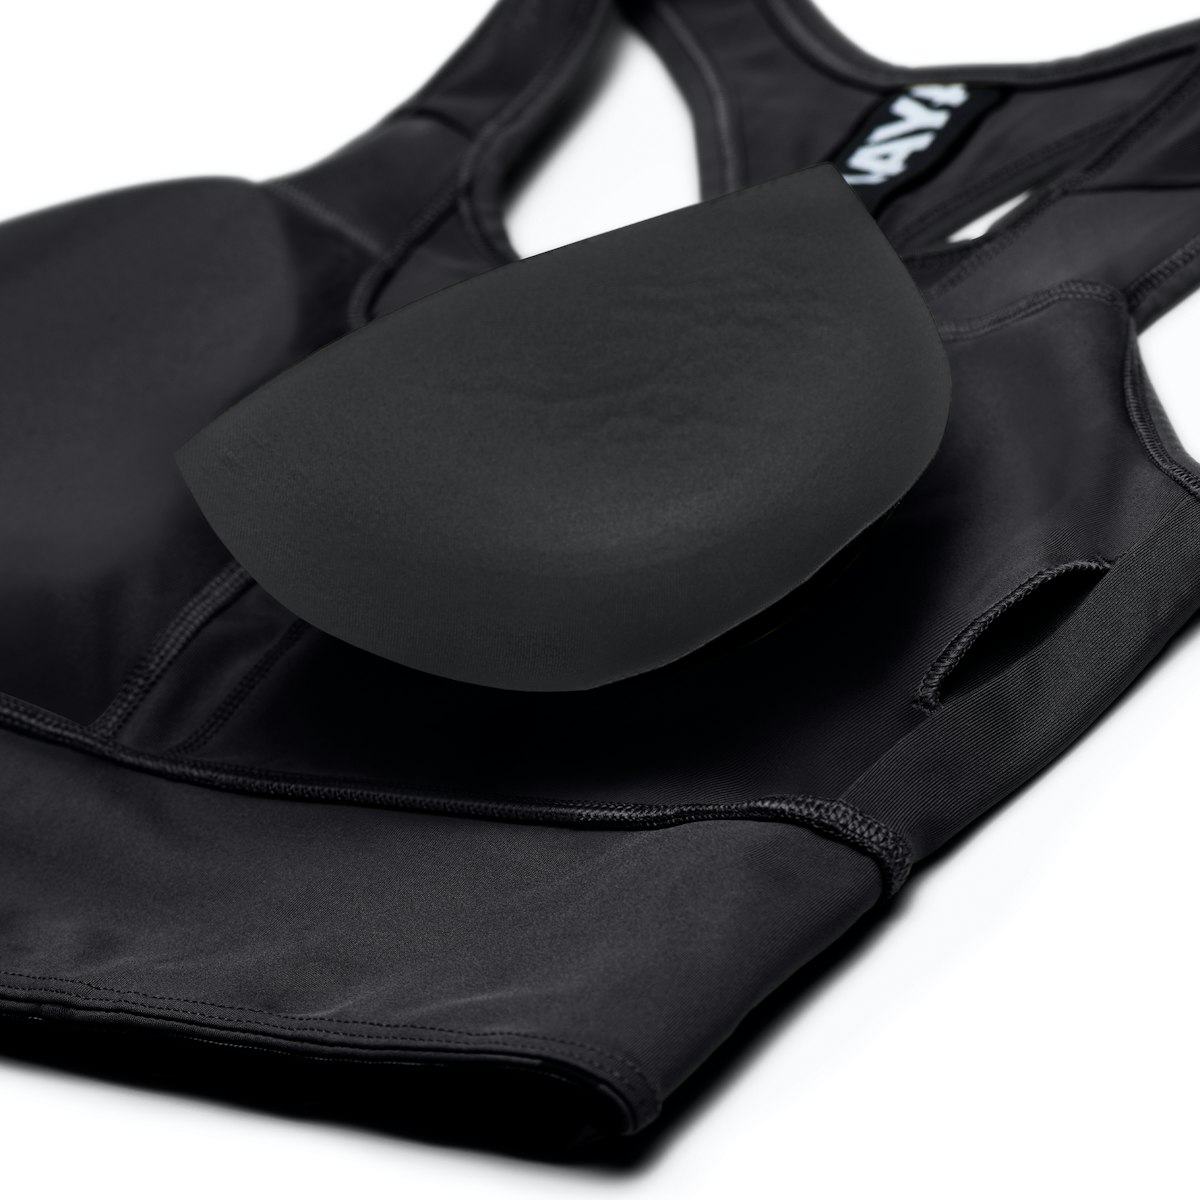 Review: Victoria's Secret Incredible Bra – Instant comfort and